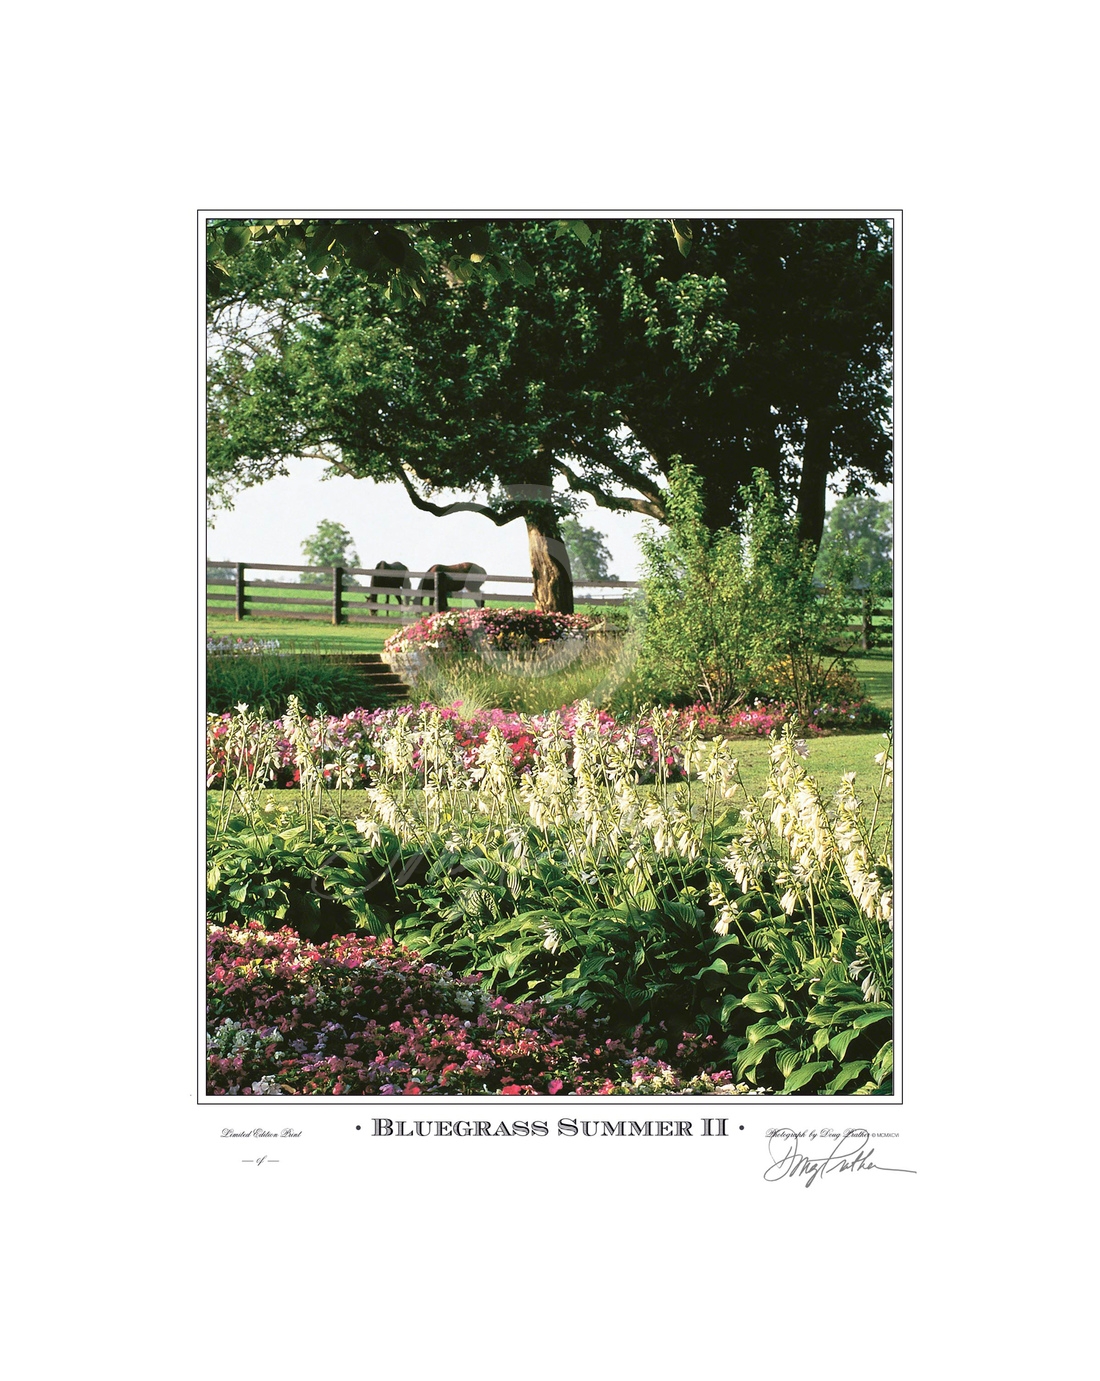 Bluegrass Summer II, a fine art horse print. A lush scene intertwining summer flowers, horses, trees and fences into a beautiful pastoral scene on Green Gates Farm, Ironworks Pike, Lexington, Ky. This was also the former Spendthrift and Elmendorf Farms. P